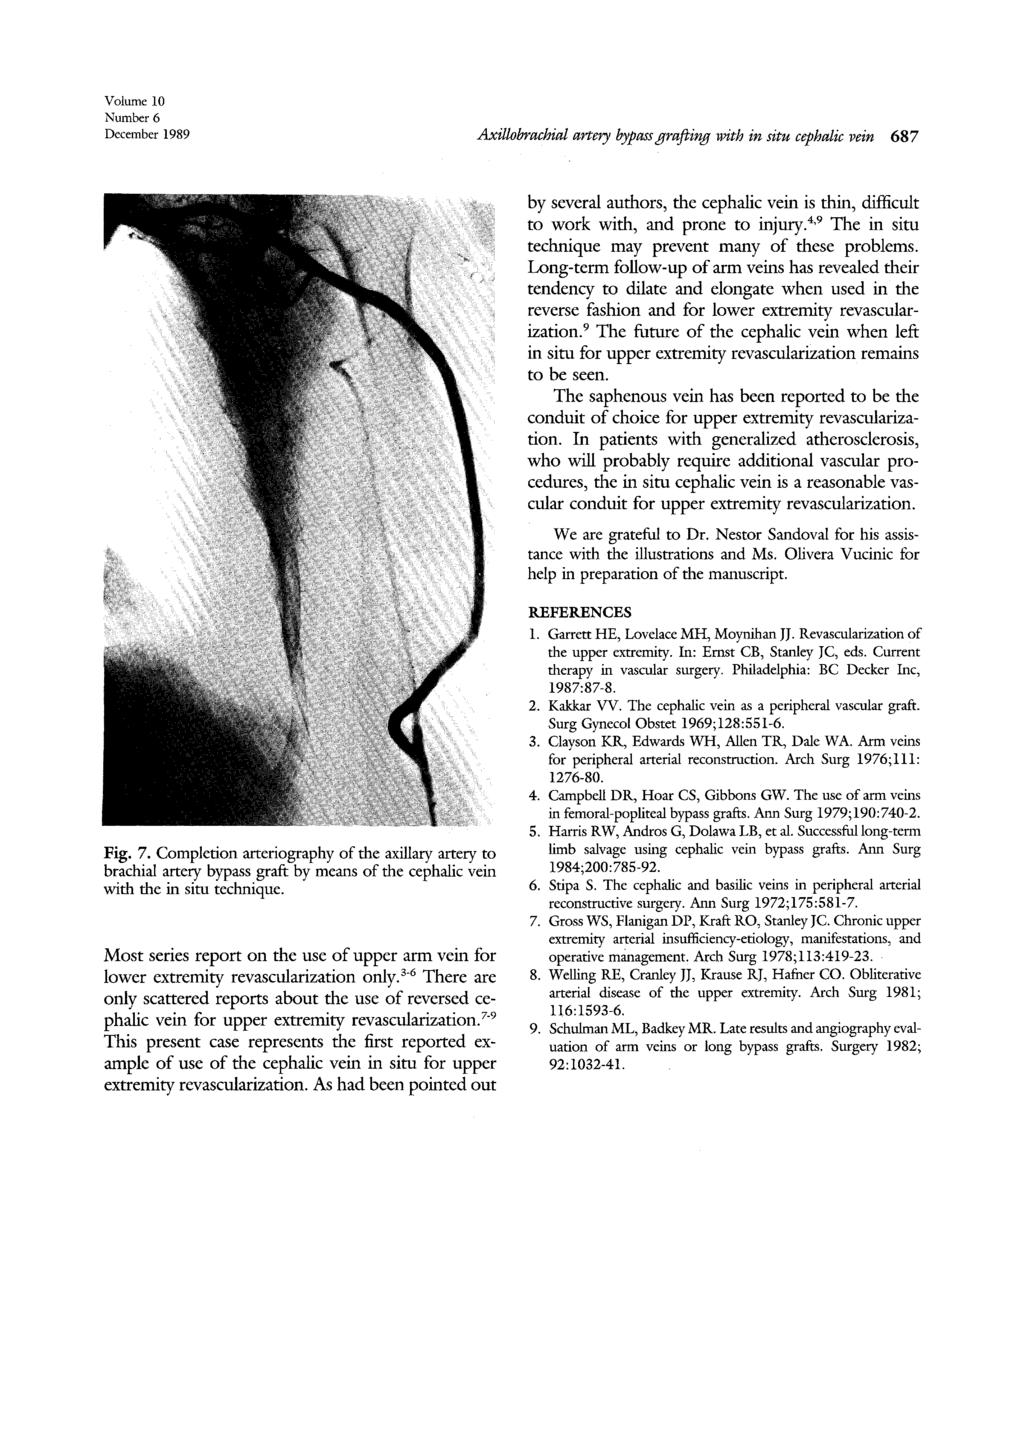 Volume 10 Number 6 December 1989 Axillobrachial artery bypass grafting with in situ cephalic vein 687 by several authors, the cephalic vein is thin, difficult to work with, and prone to injury.